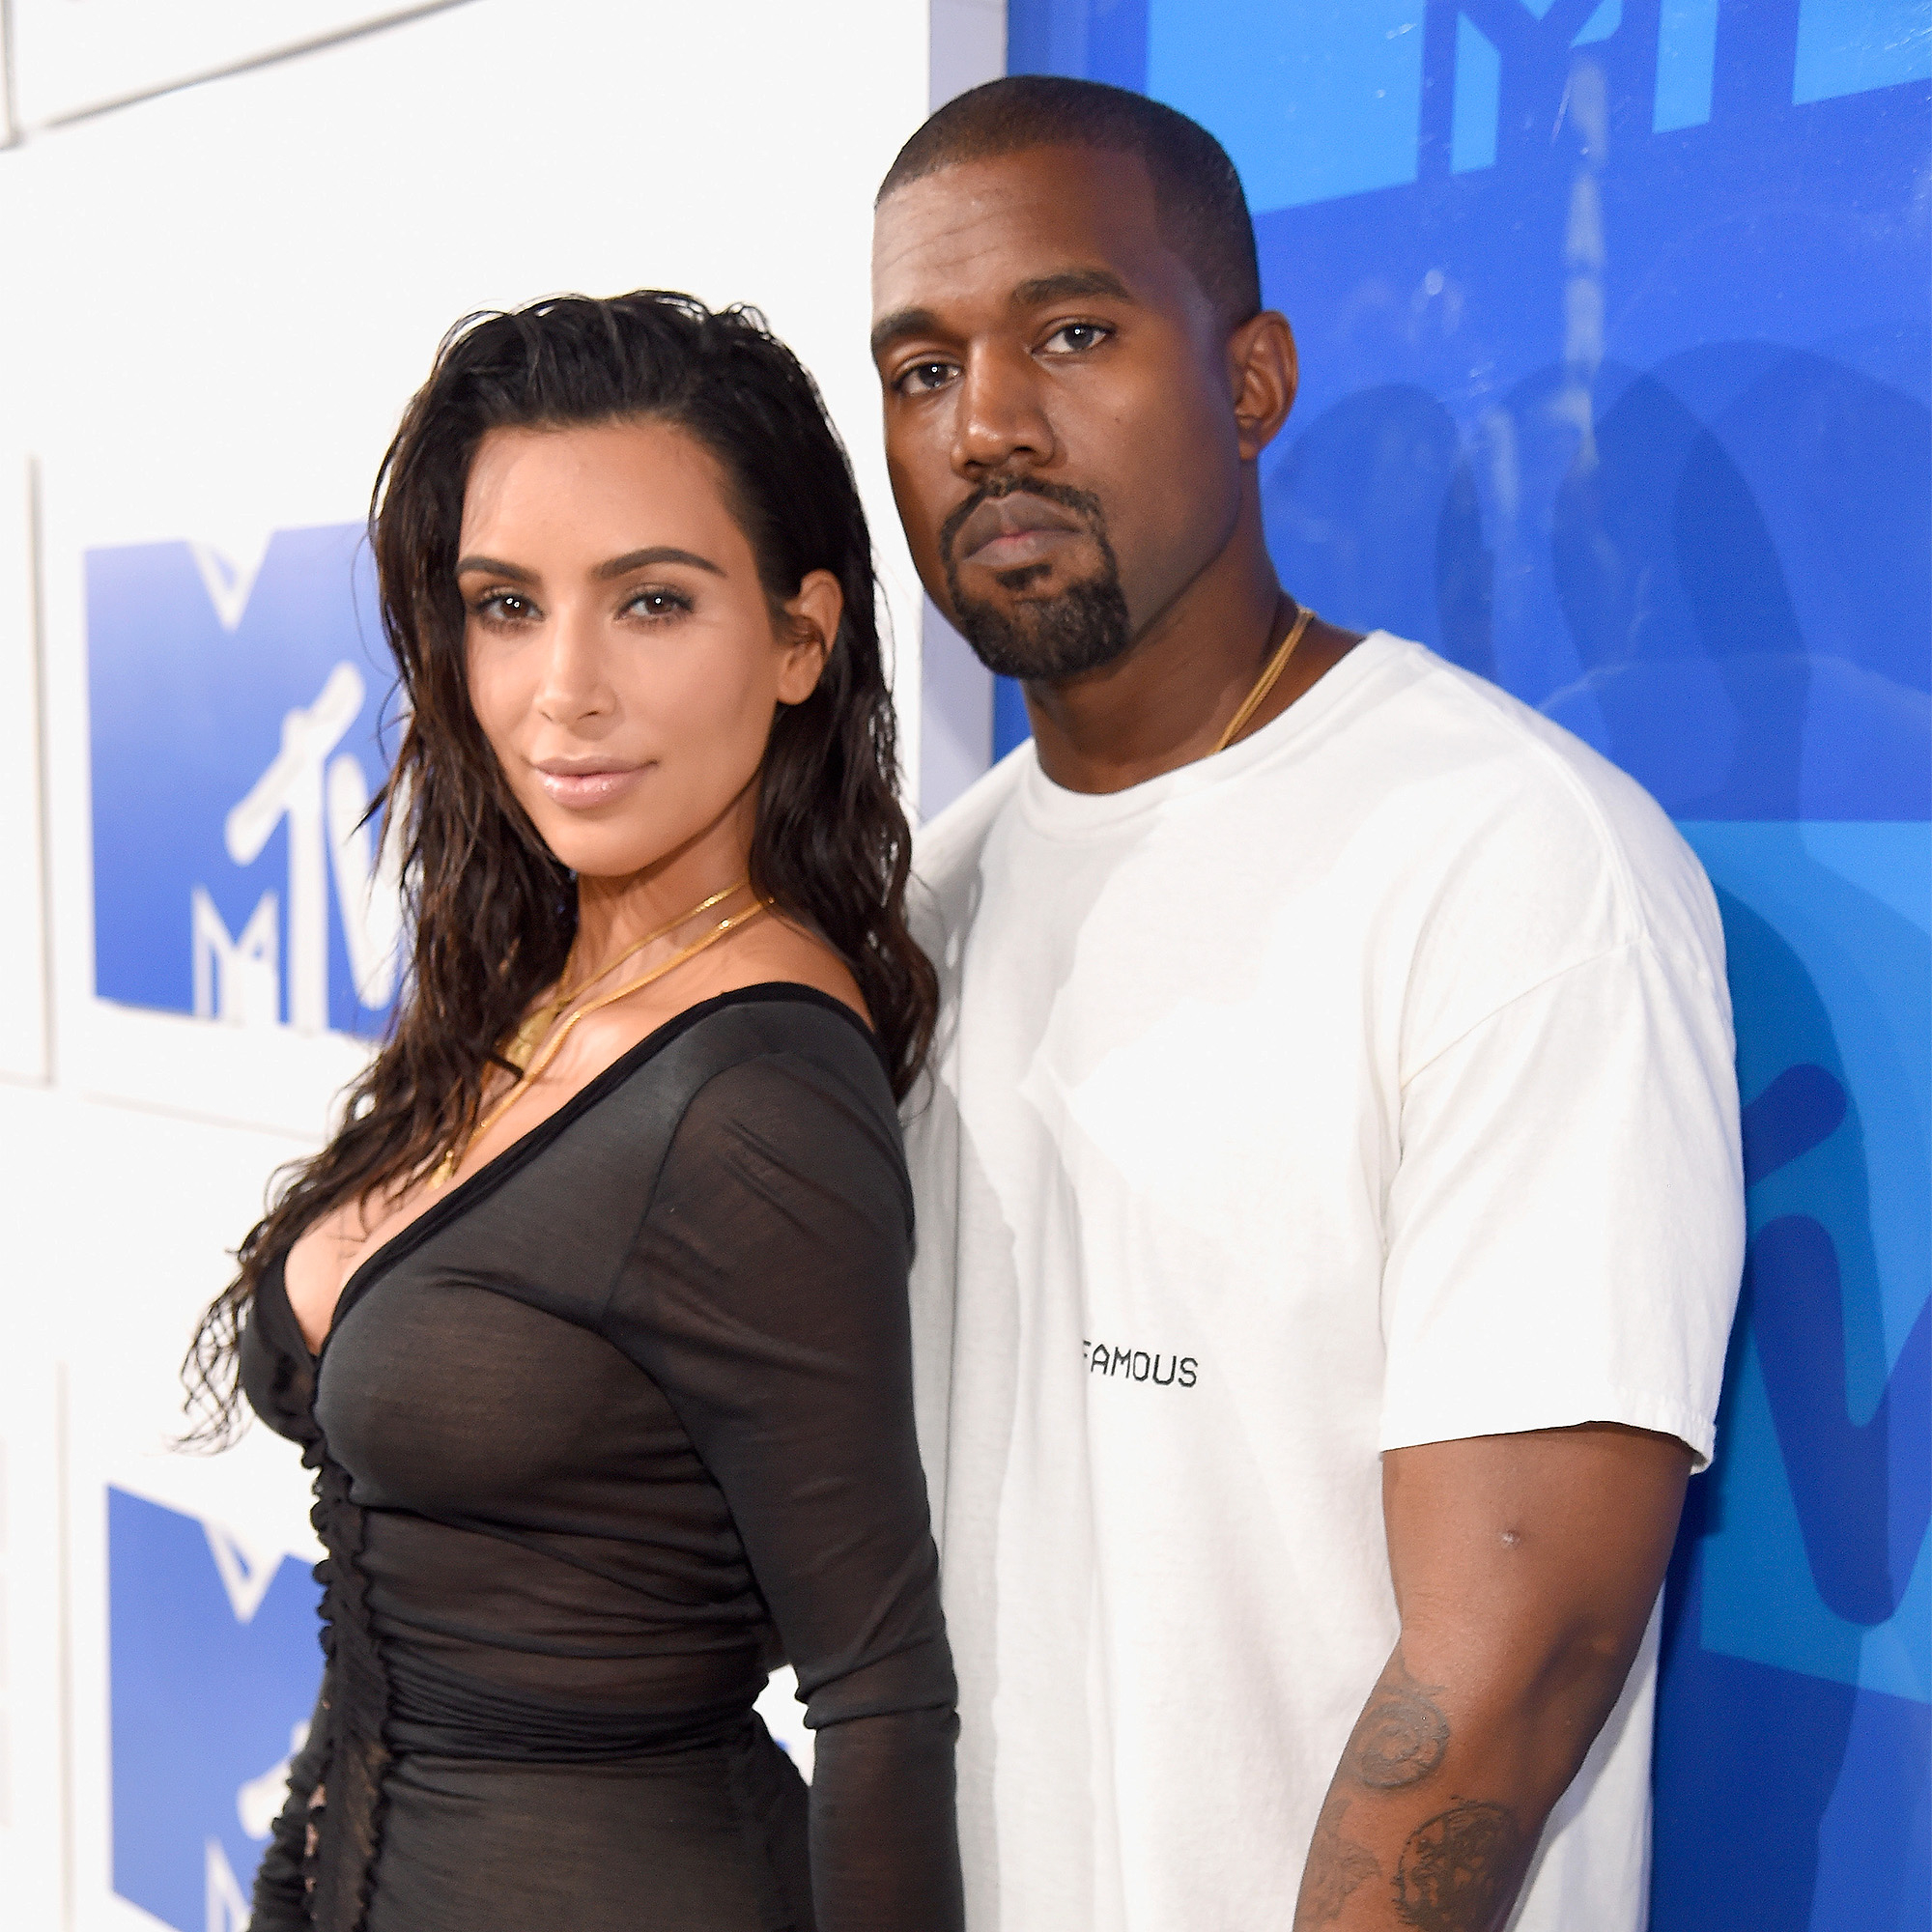 It’s Time to Find Out What Fantasy World You Belong in With the Celebs You Prefer Kanye West and Kim Kardashian